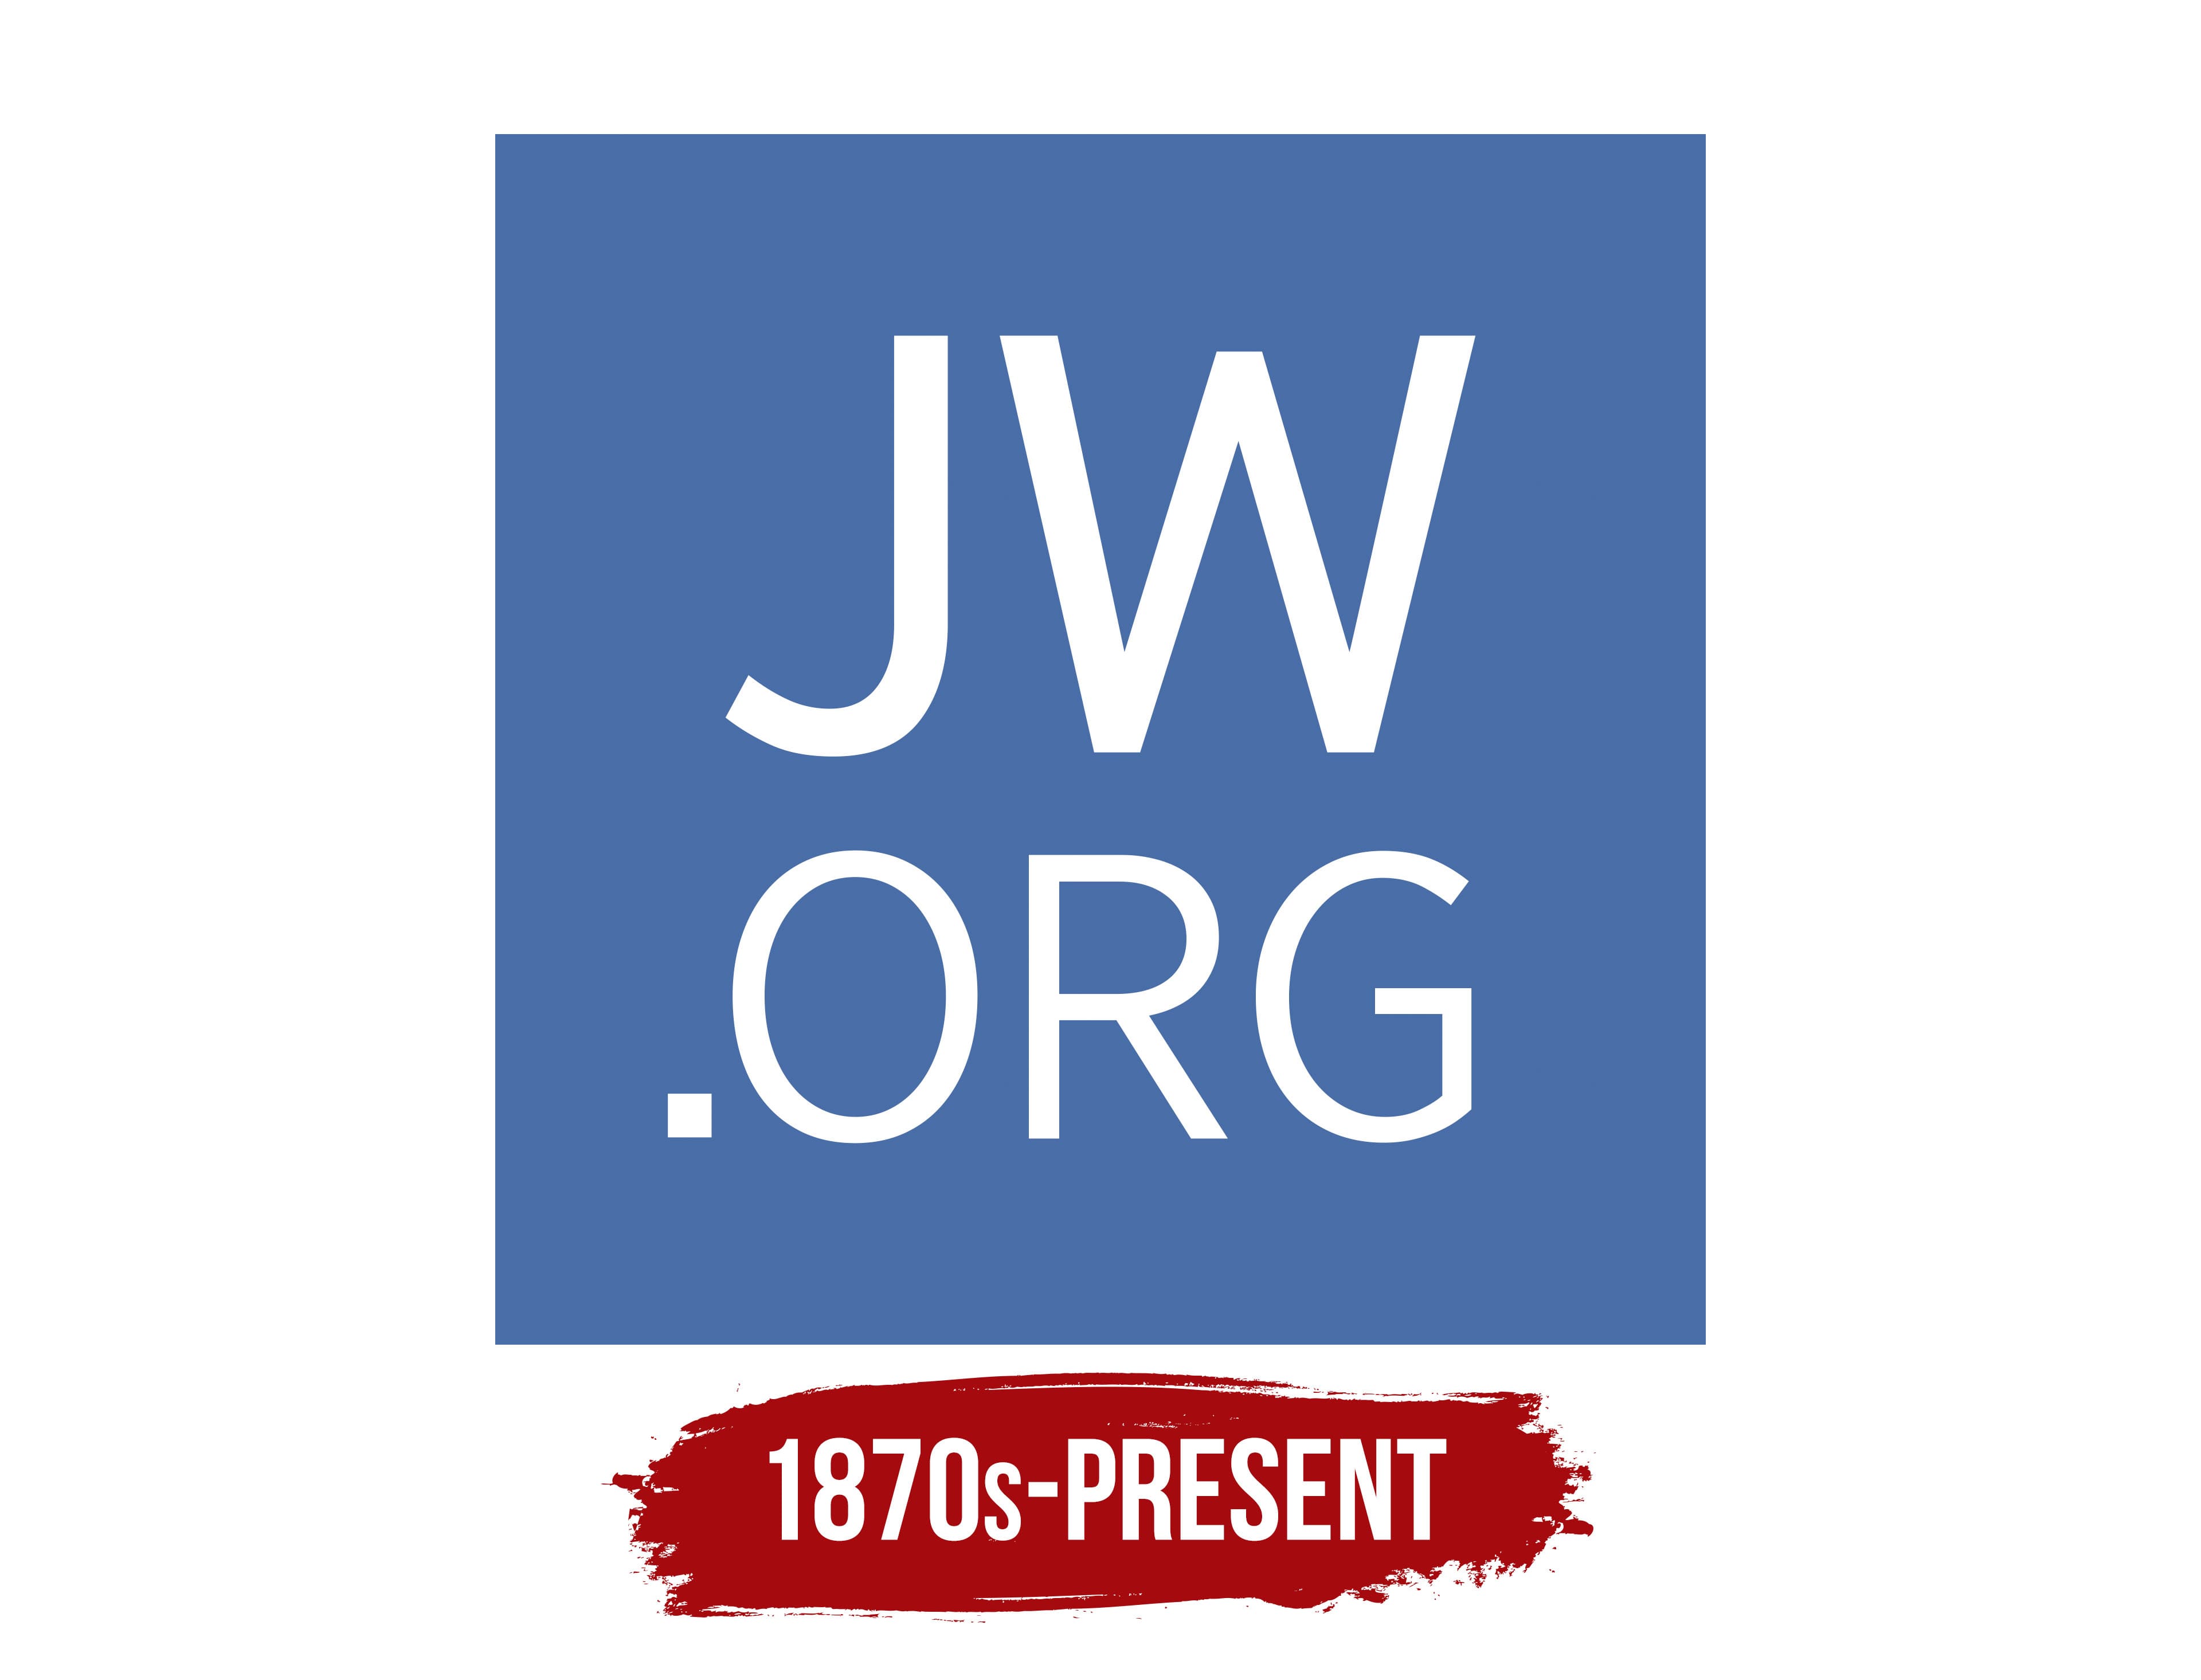 JW org Logo, symbol, meaning, history, PNG, brand